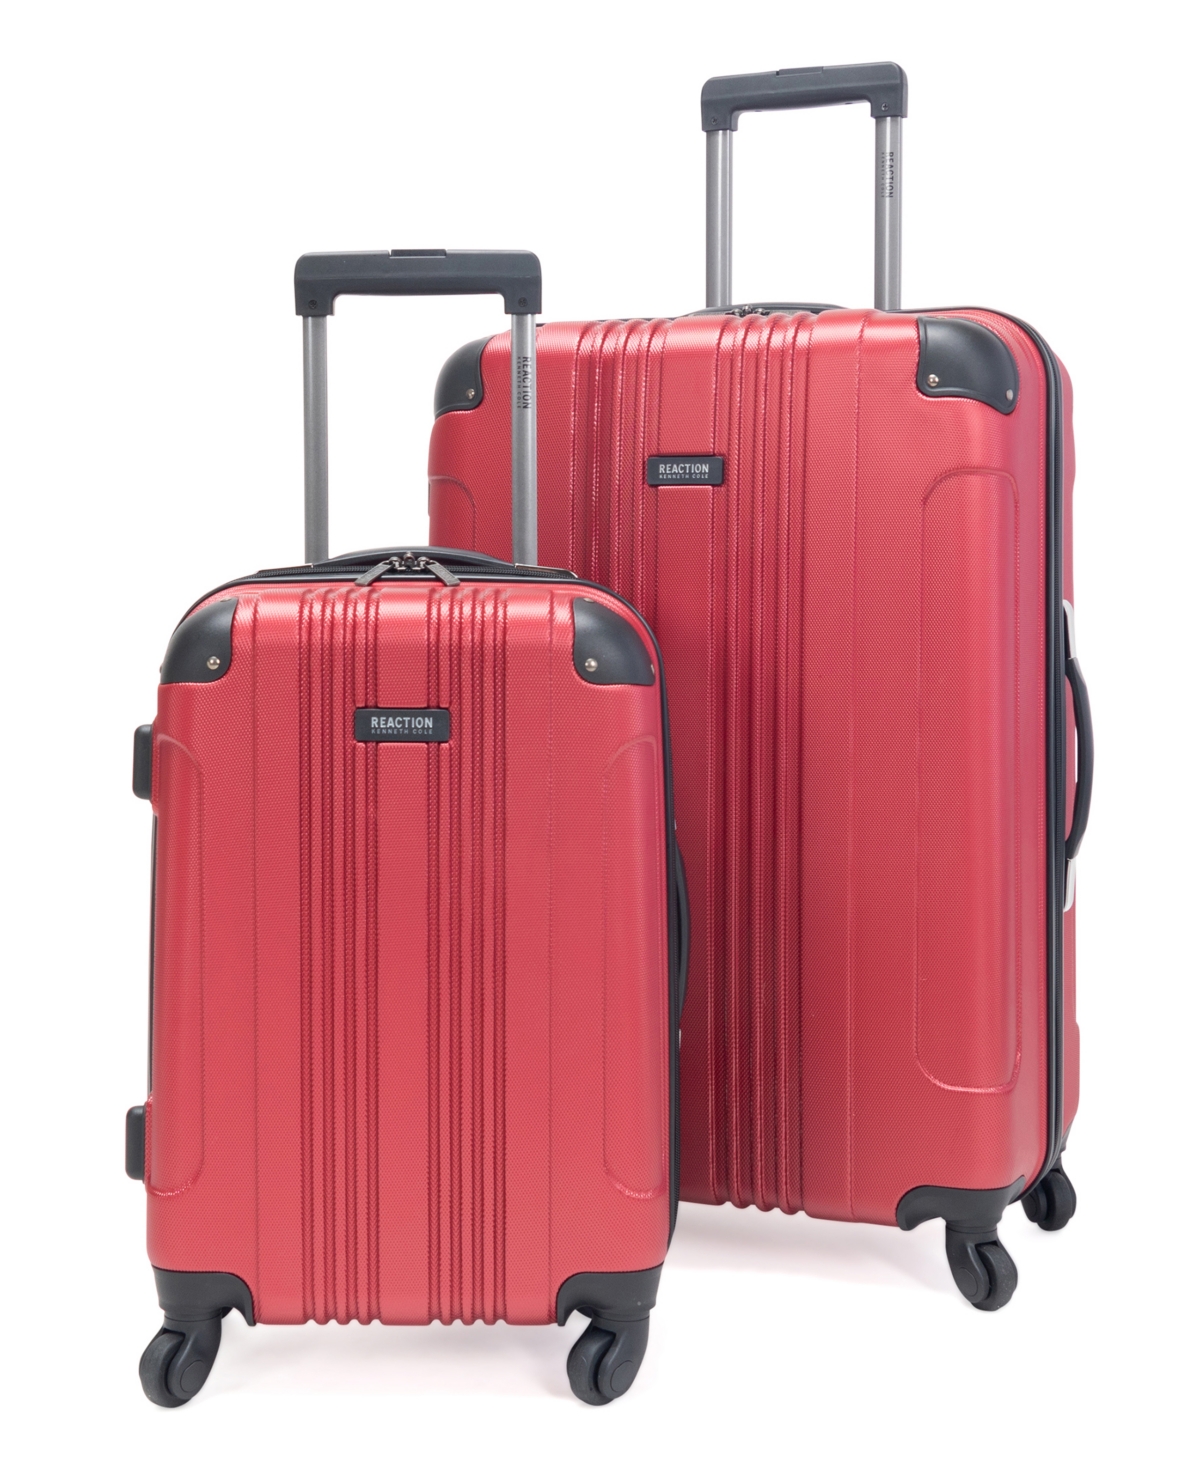 Kenneth Cole Reaction Out Of Bounds 2-pc Lightweight Hardside Spinner Luggage Set In Scarlet Red